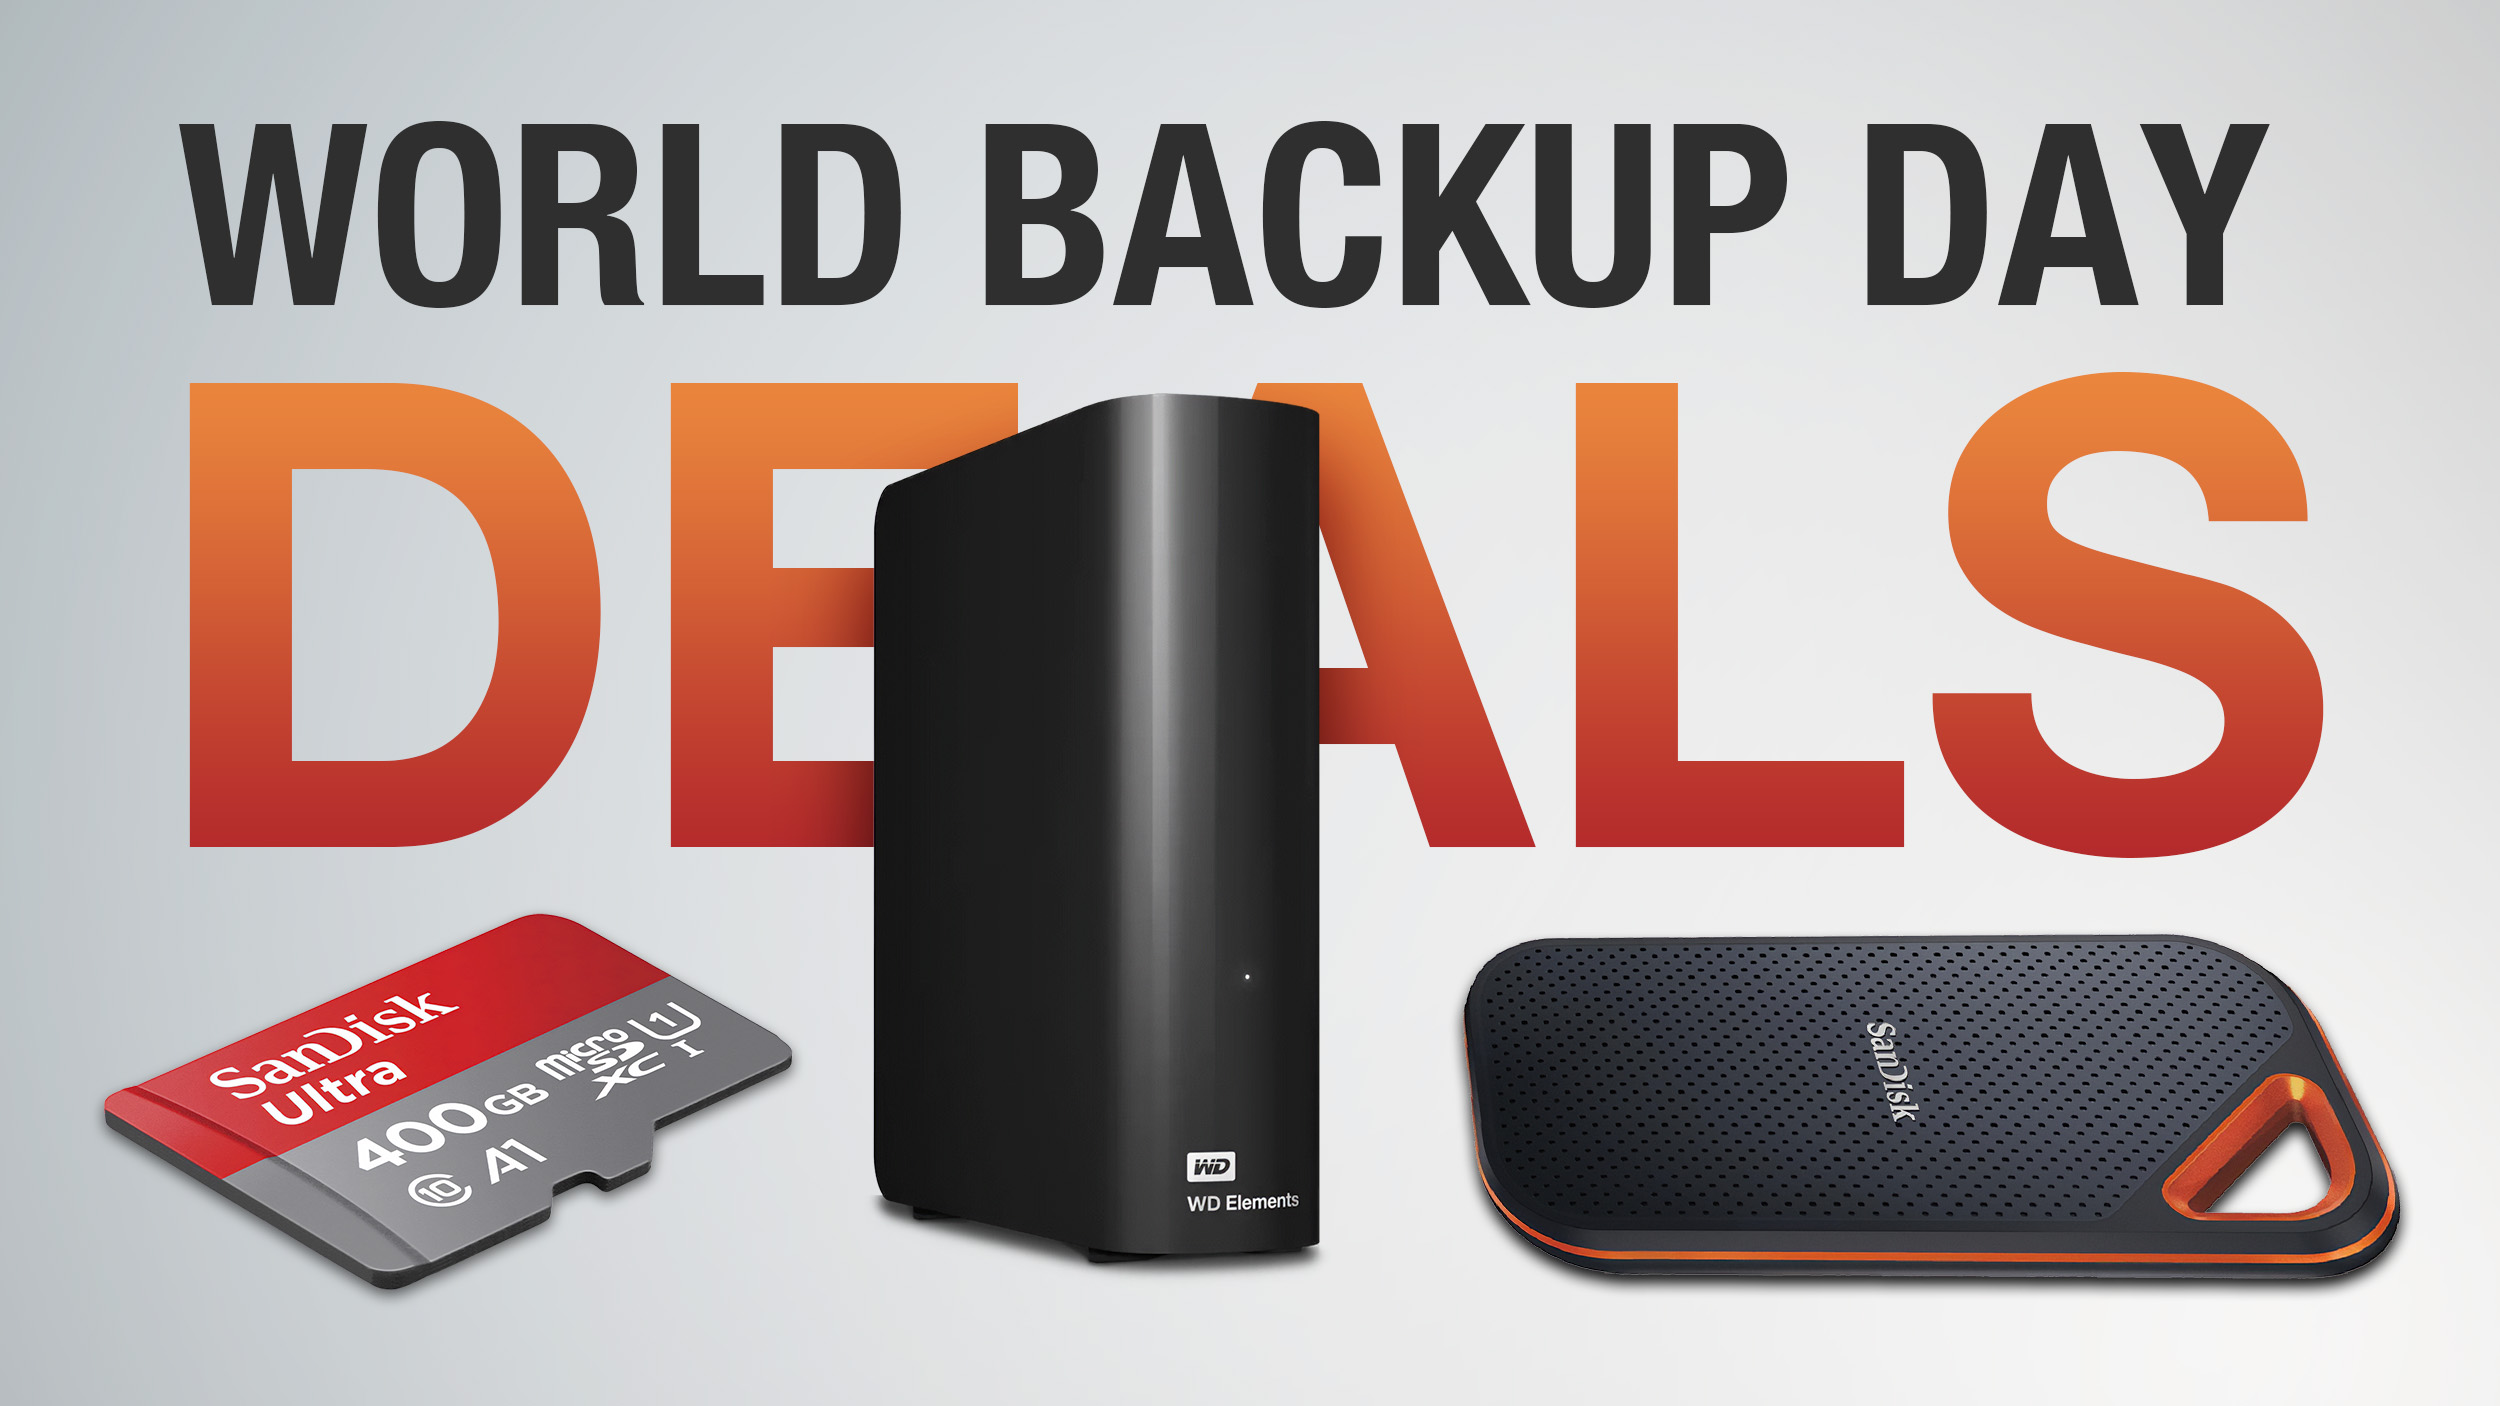 Deals: Save on the Best Storage Accessories From Samsung, Adorama, and More for World Backup Day